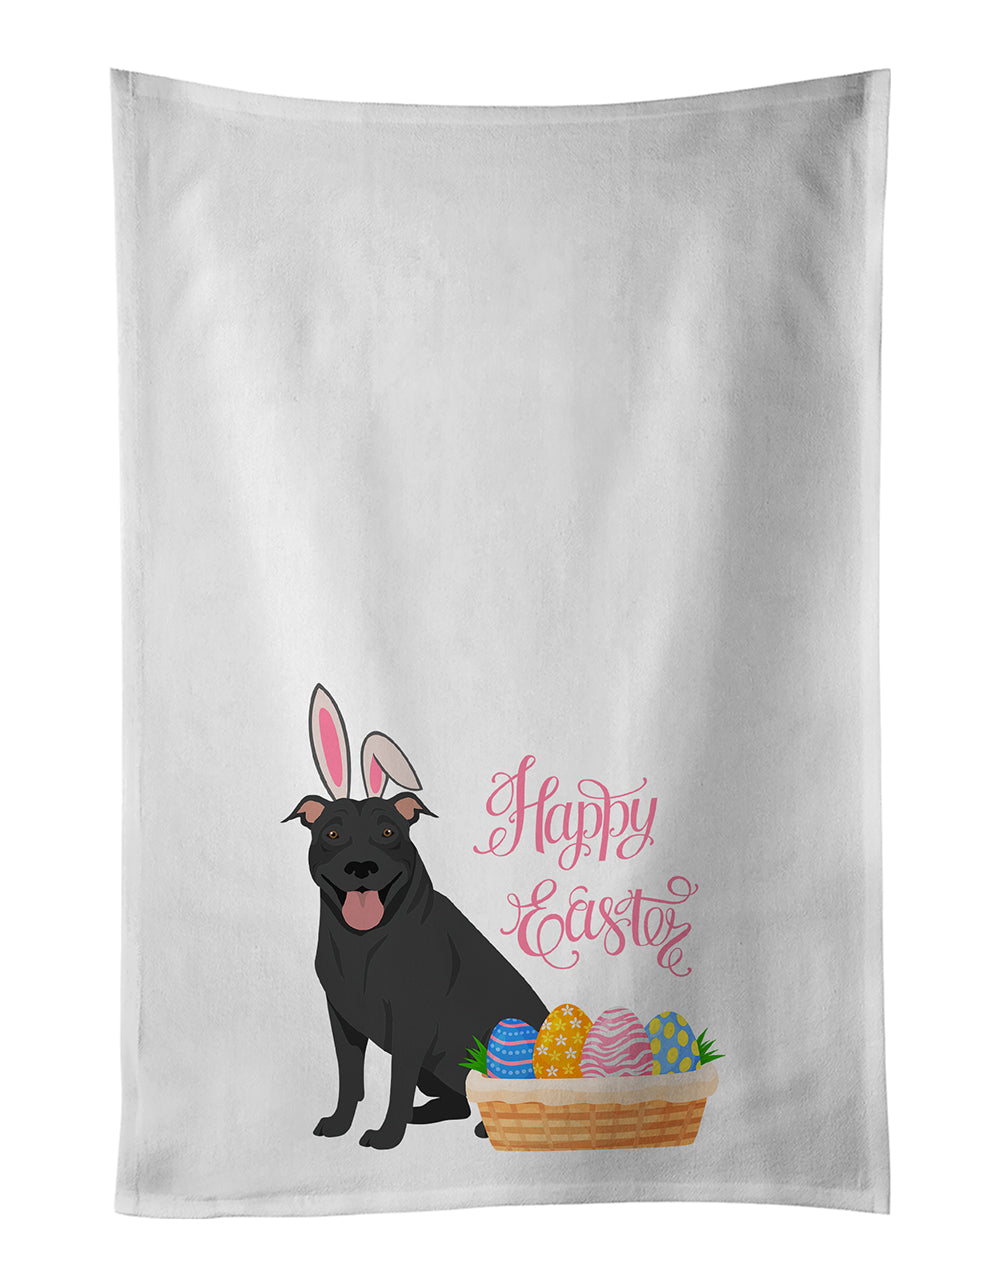 Buy this Black Pit Bull Terrier Easter White Kitchen Towel Set of 2 Dish Towels